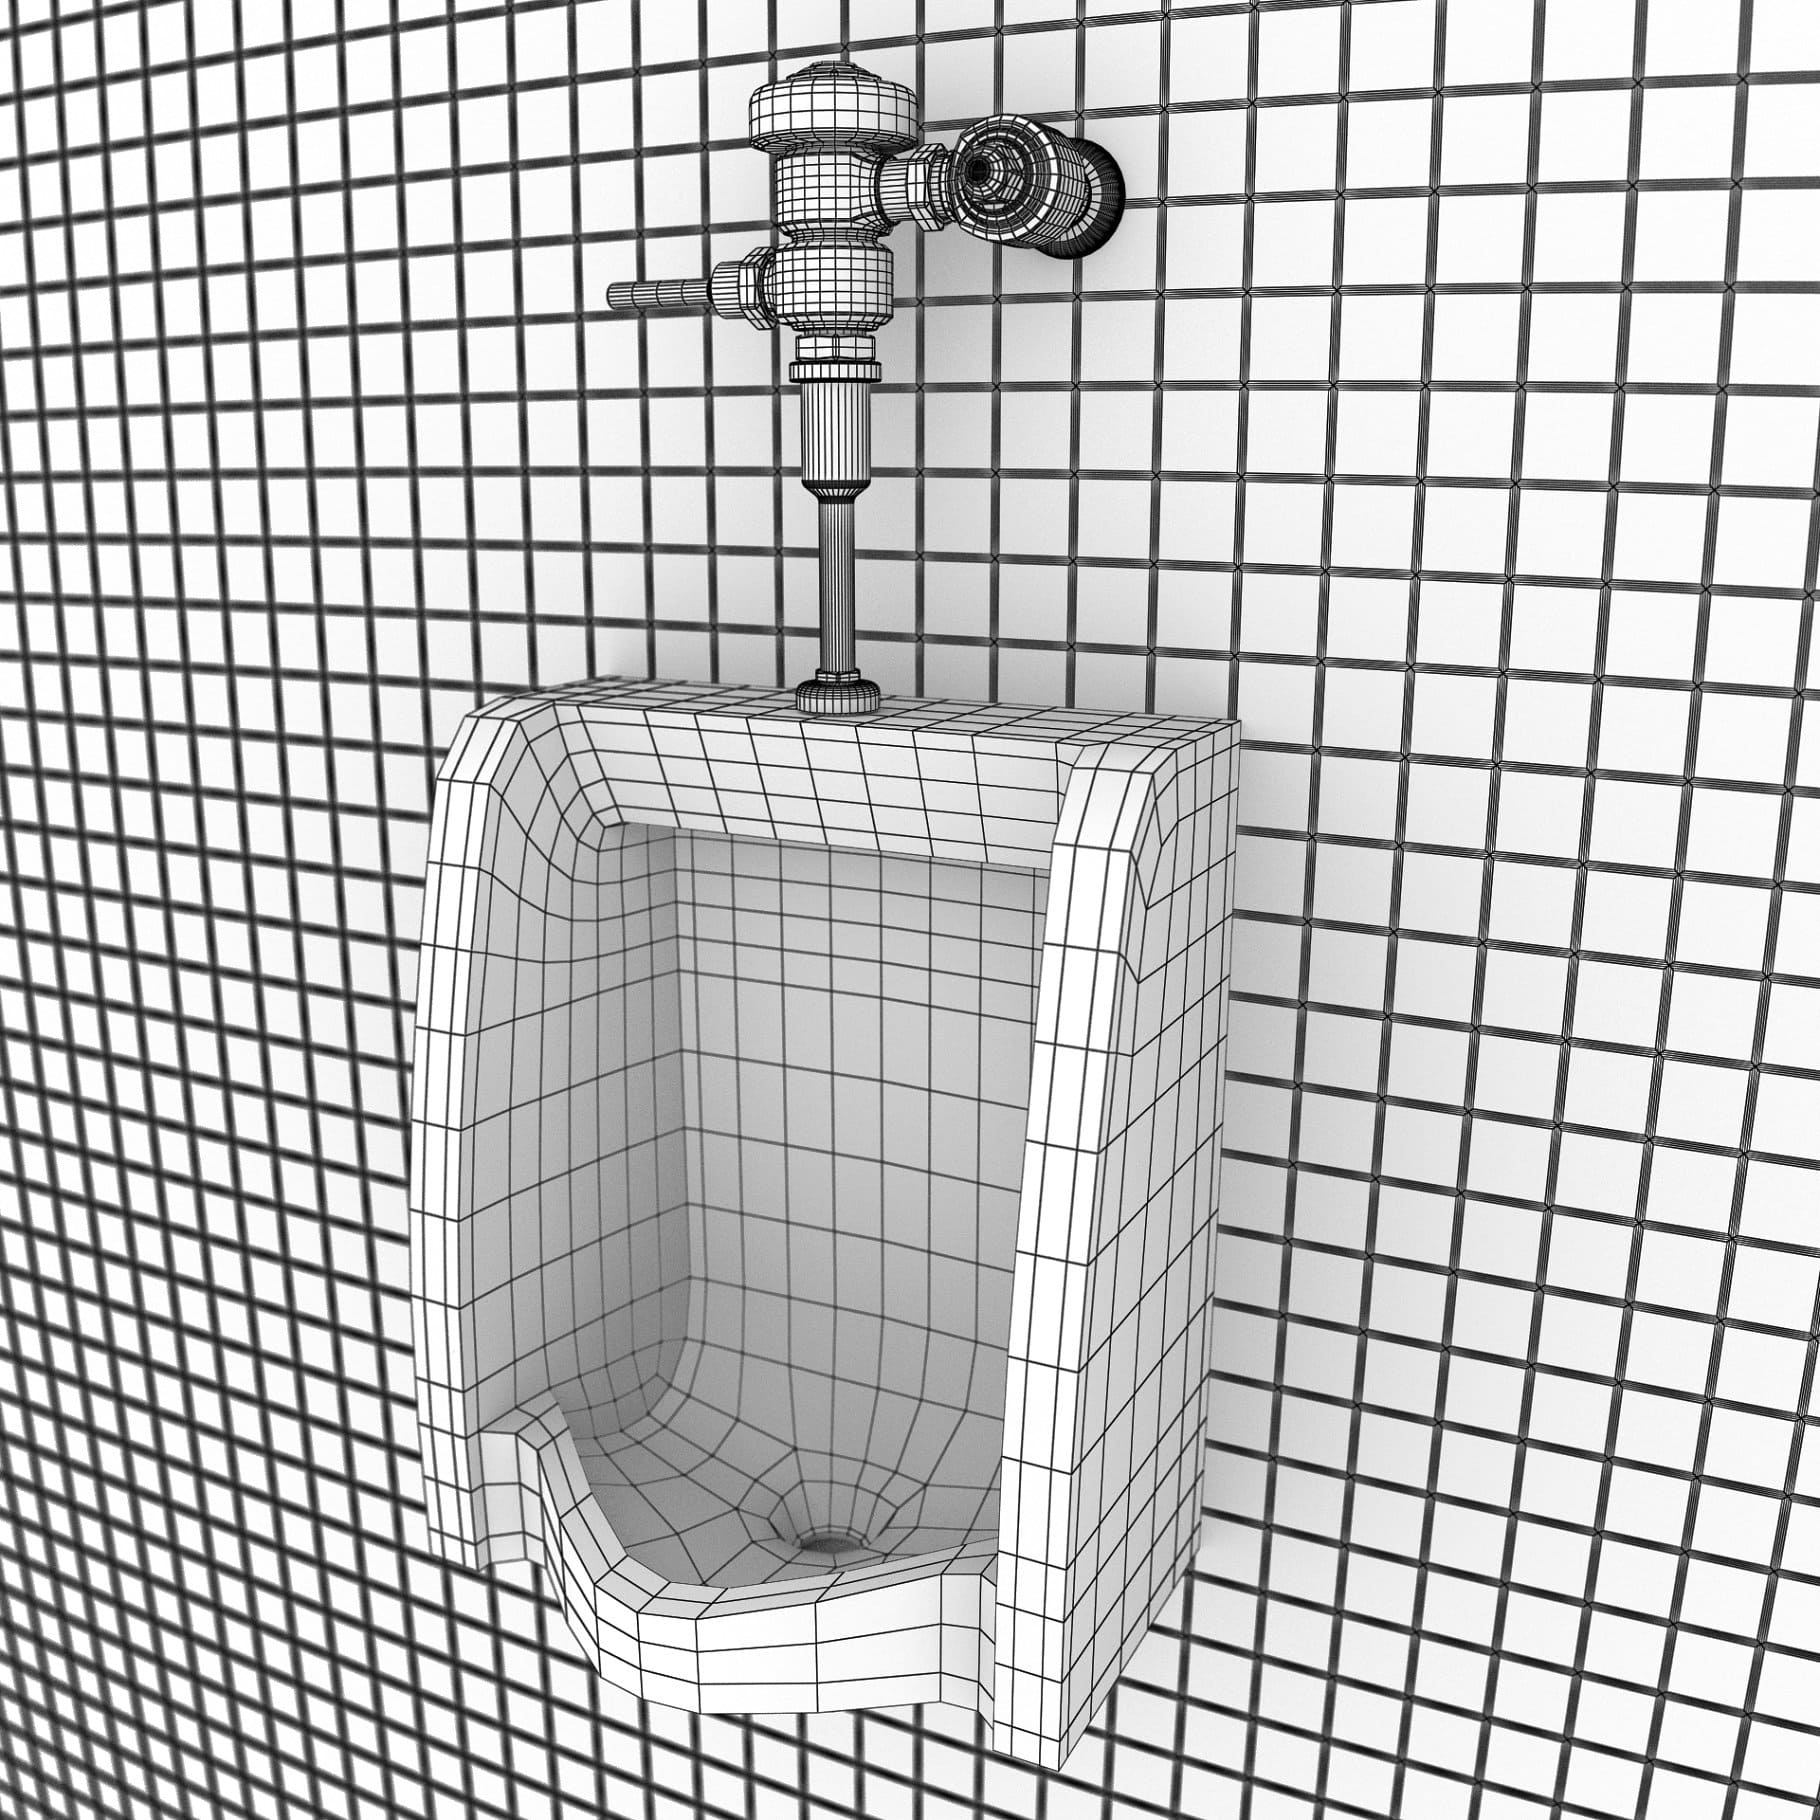 The 3D model of the urinal is drawn with the help of intersecting black lines.